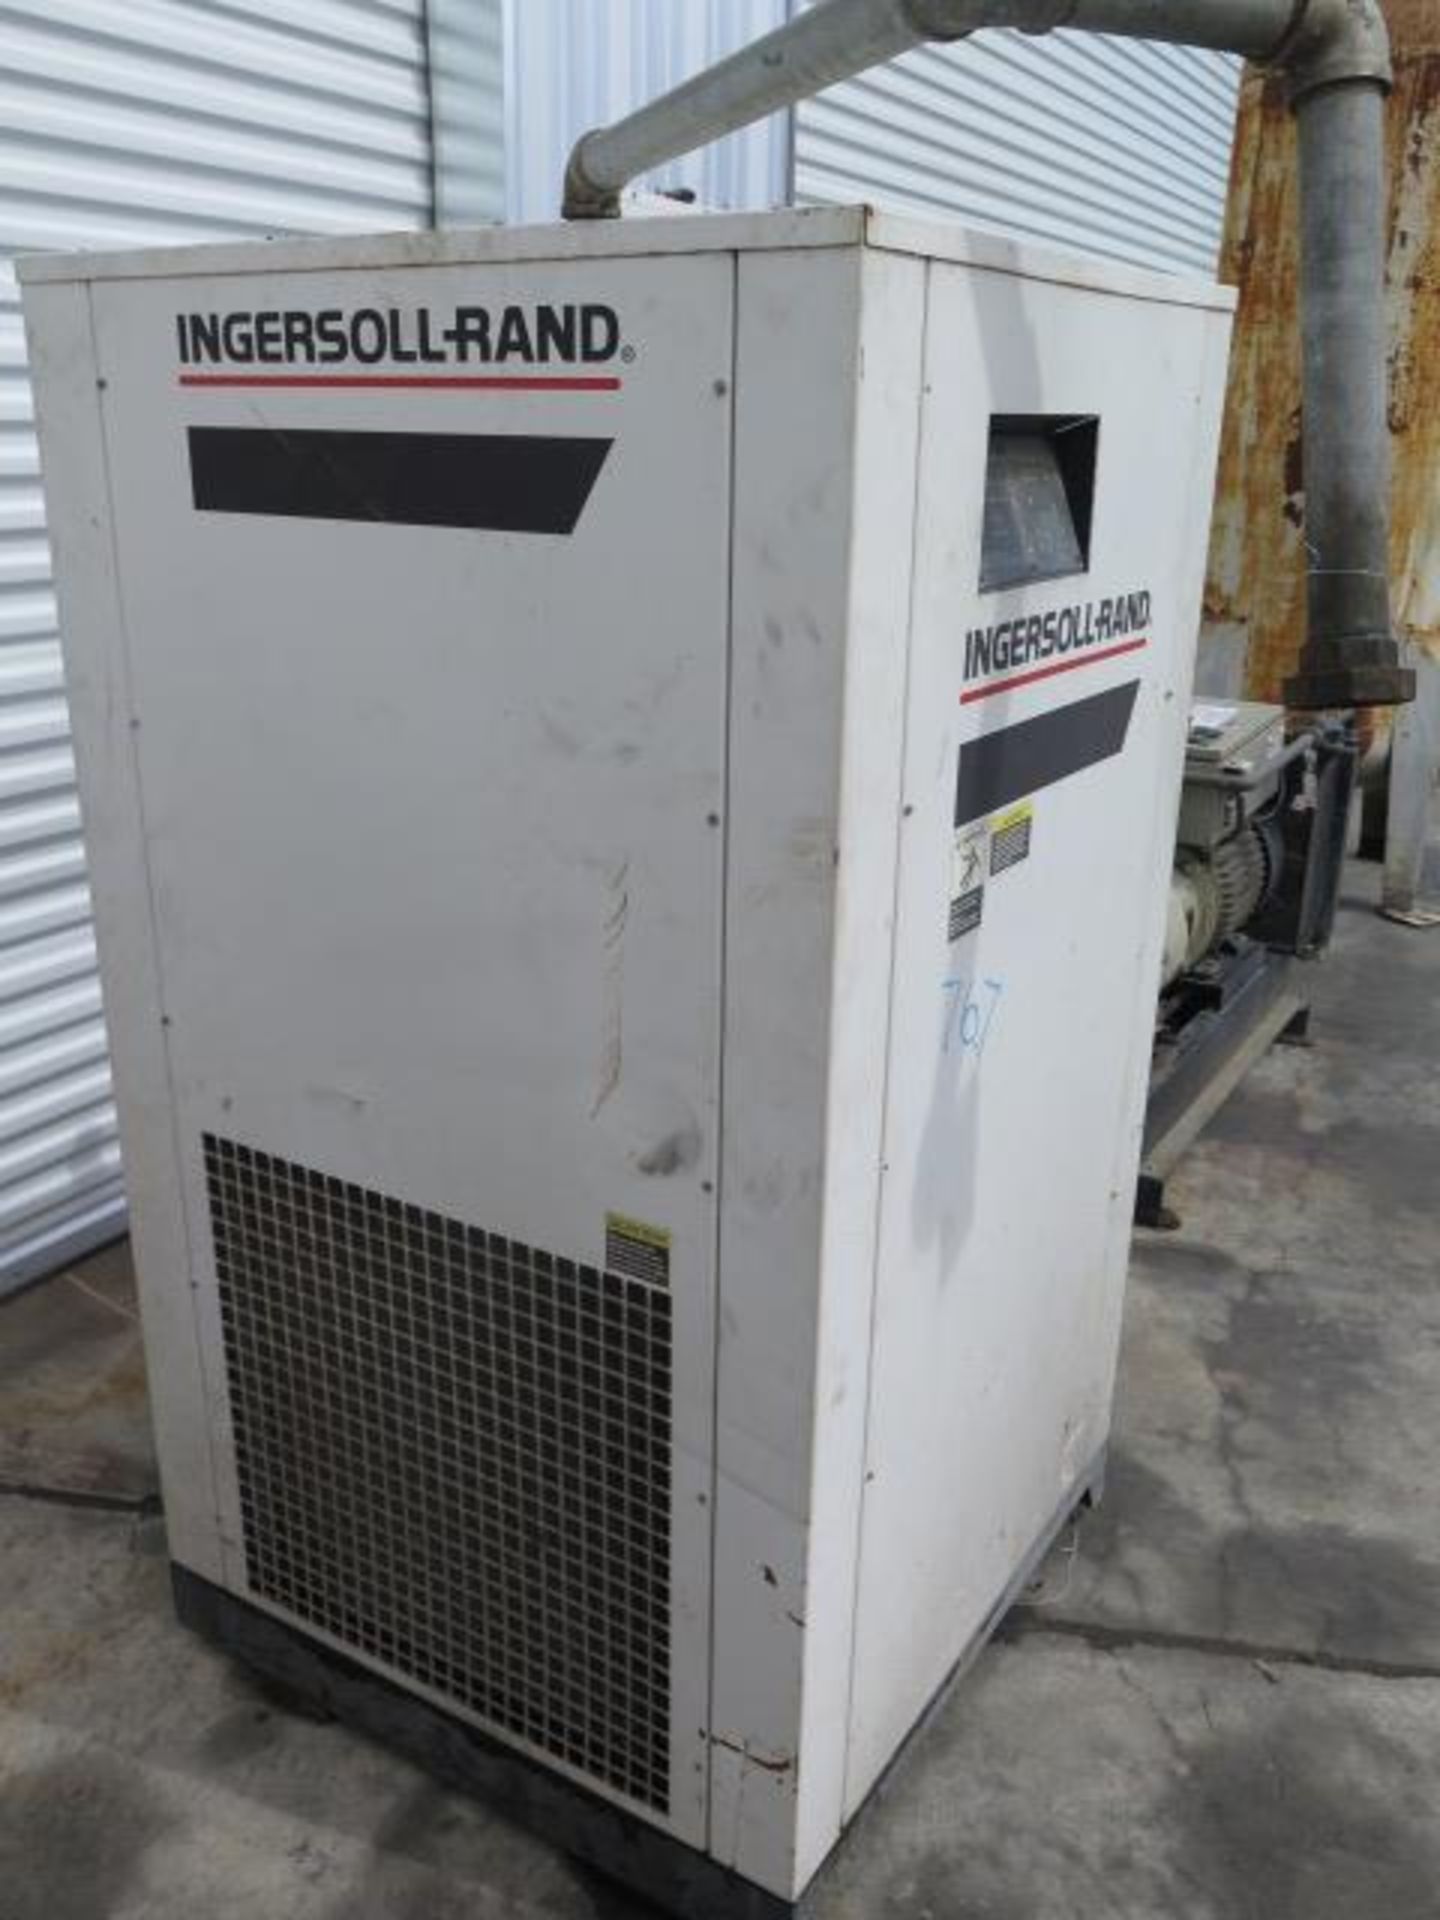 Ingersoll Tand DXR425 Refrigerated Air Dryer s/n 98ADXR0108 (SOLD AS-IS - NO WARRANTY) - Image 4 of 6